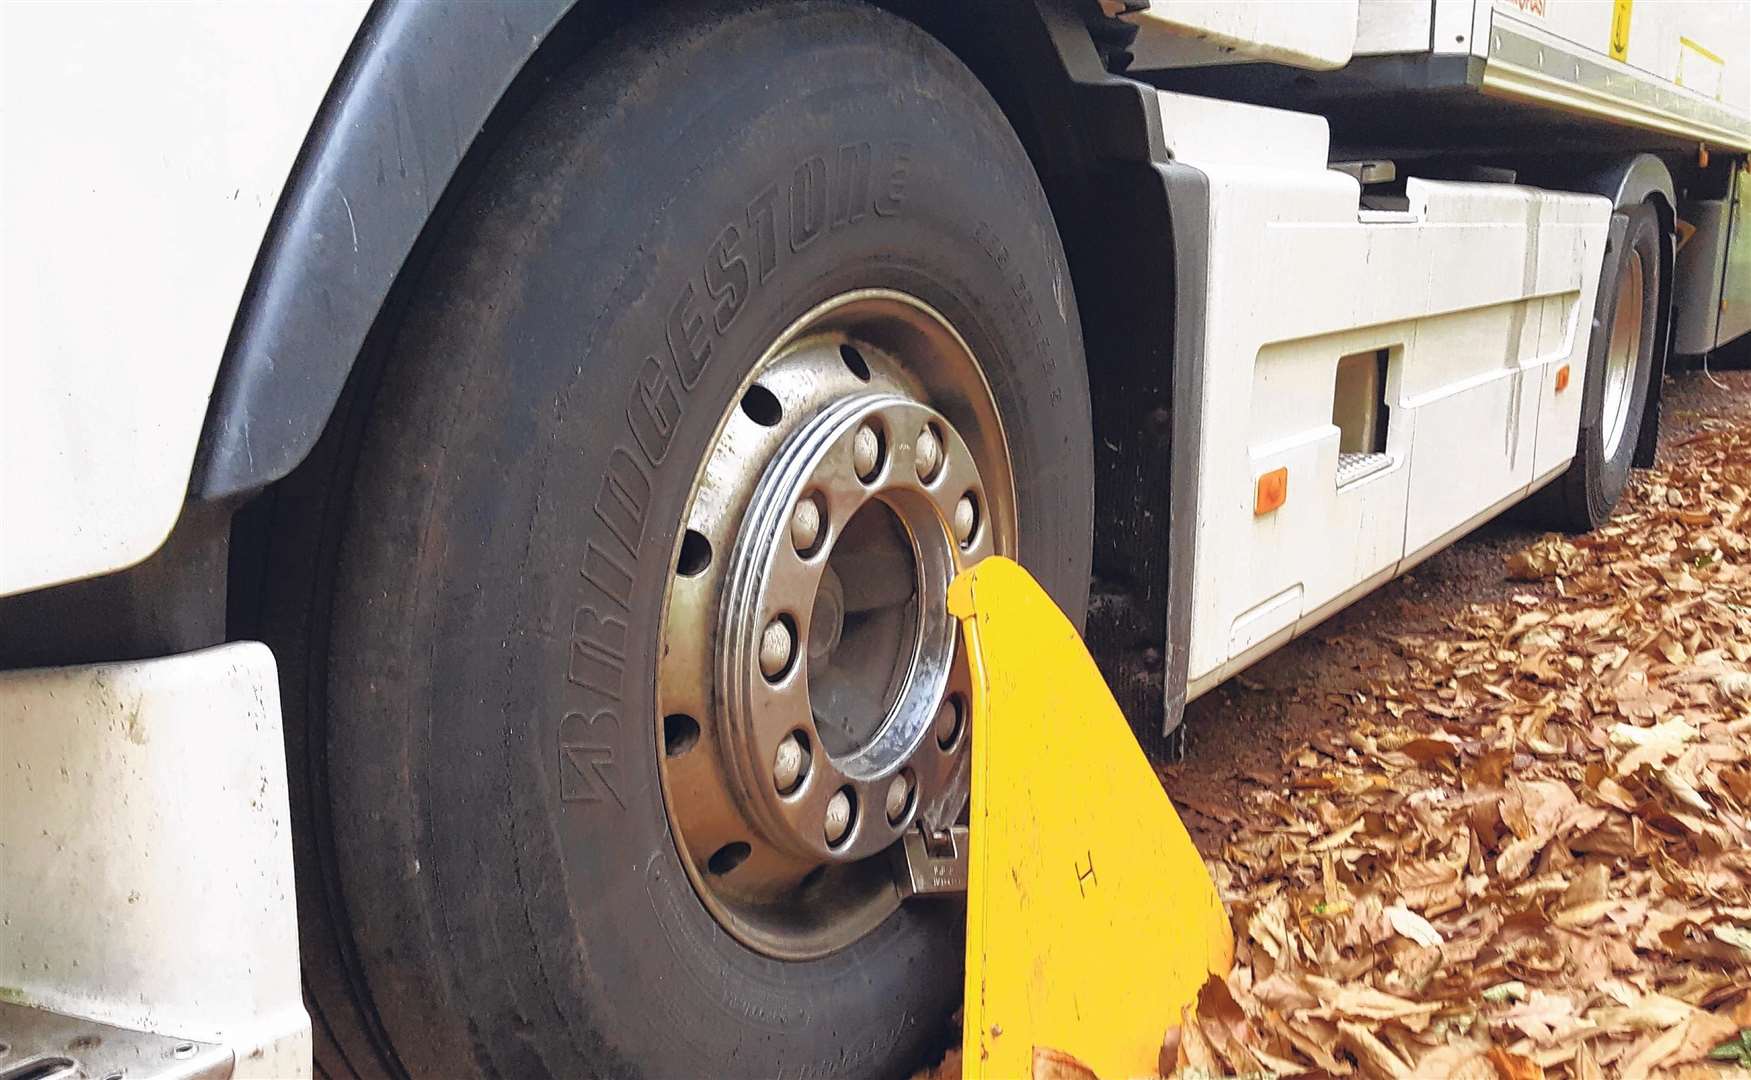 More than 2,000 HGVs have been clamped since the pilot scheme was launched